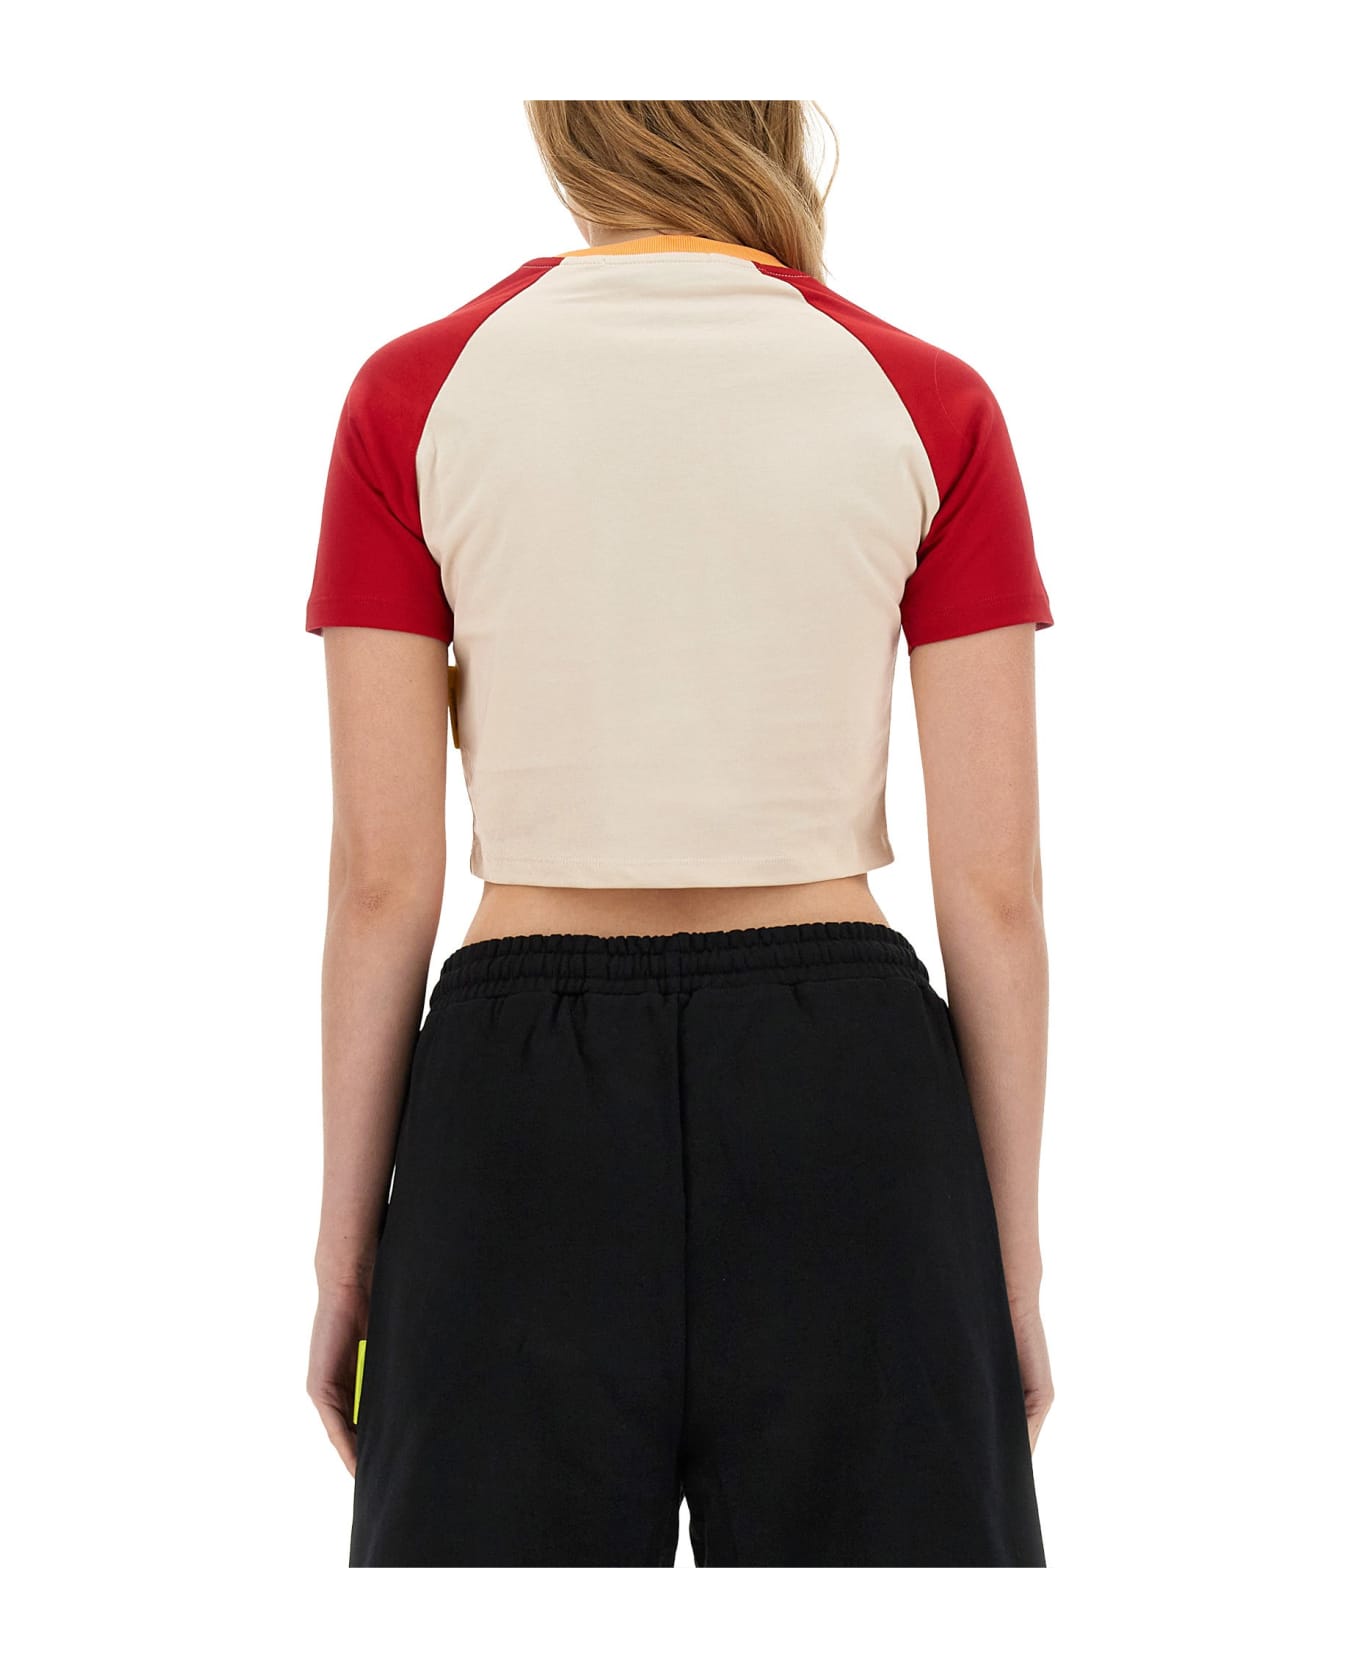 Barrow Cropped T-shirt - MULTICOLOR